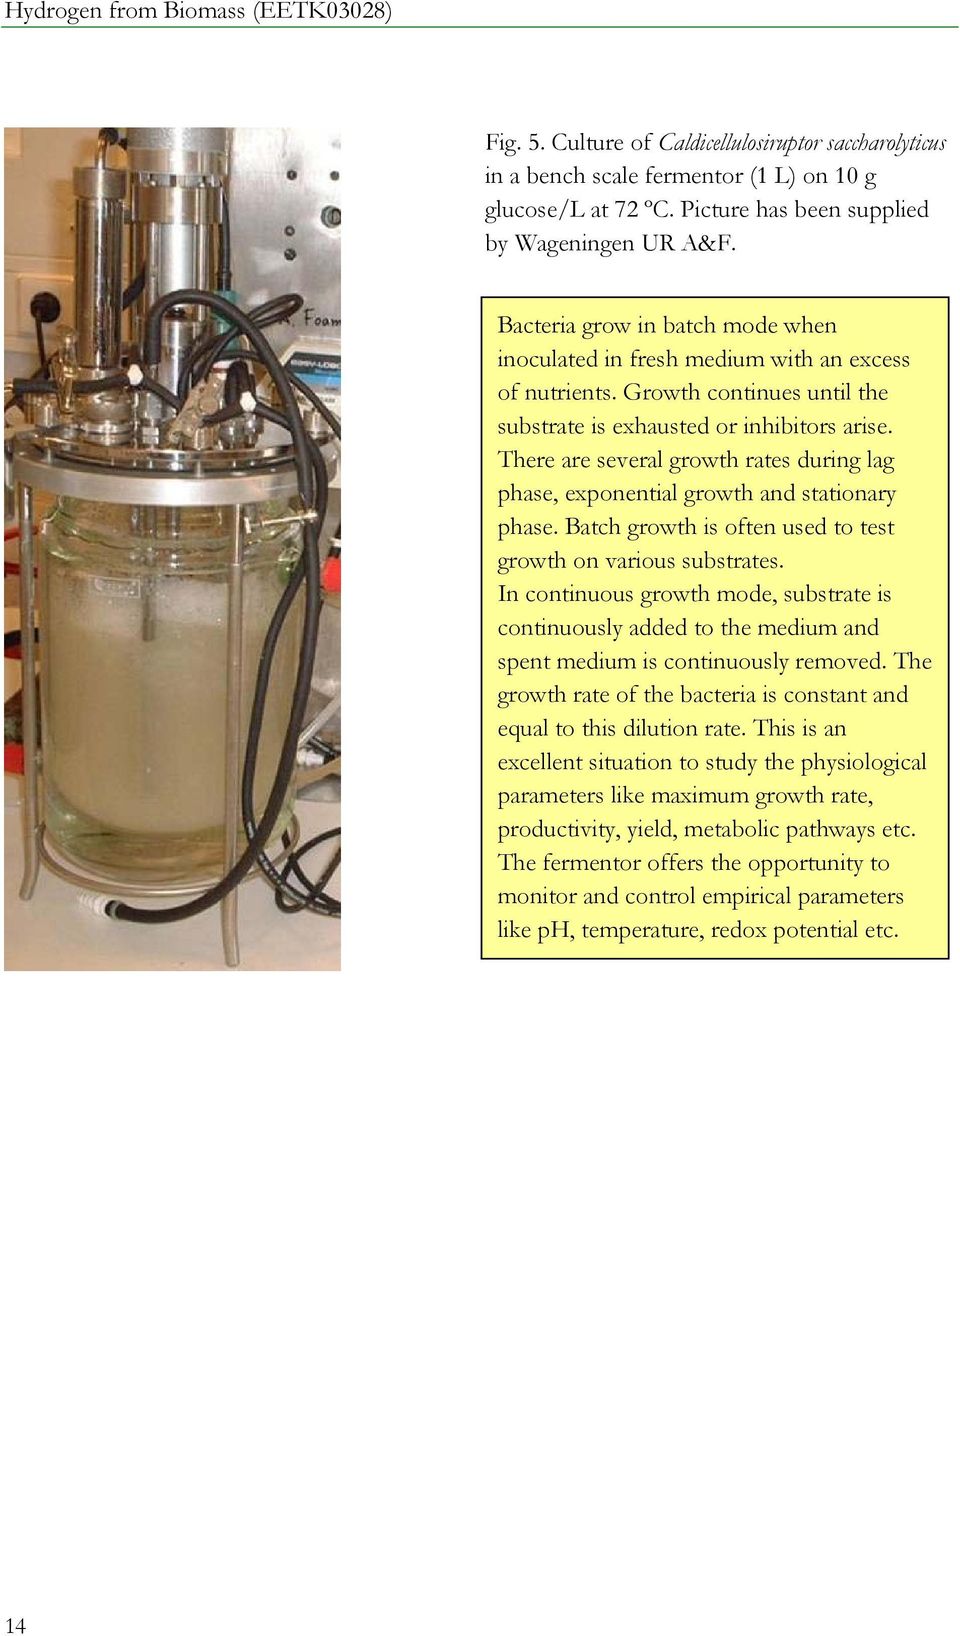 There are several growth rates during lag phase, exponential growth and stationary phase. Batch growth is often used to test growth on various substrates.